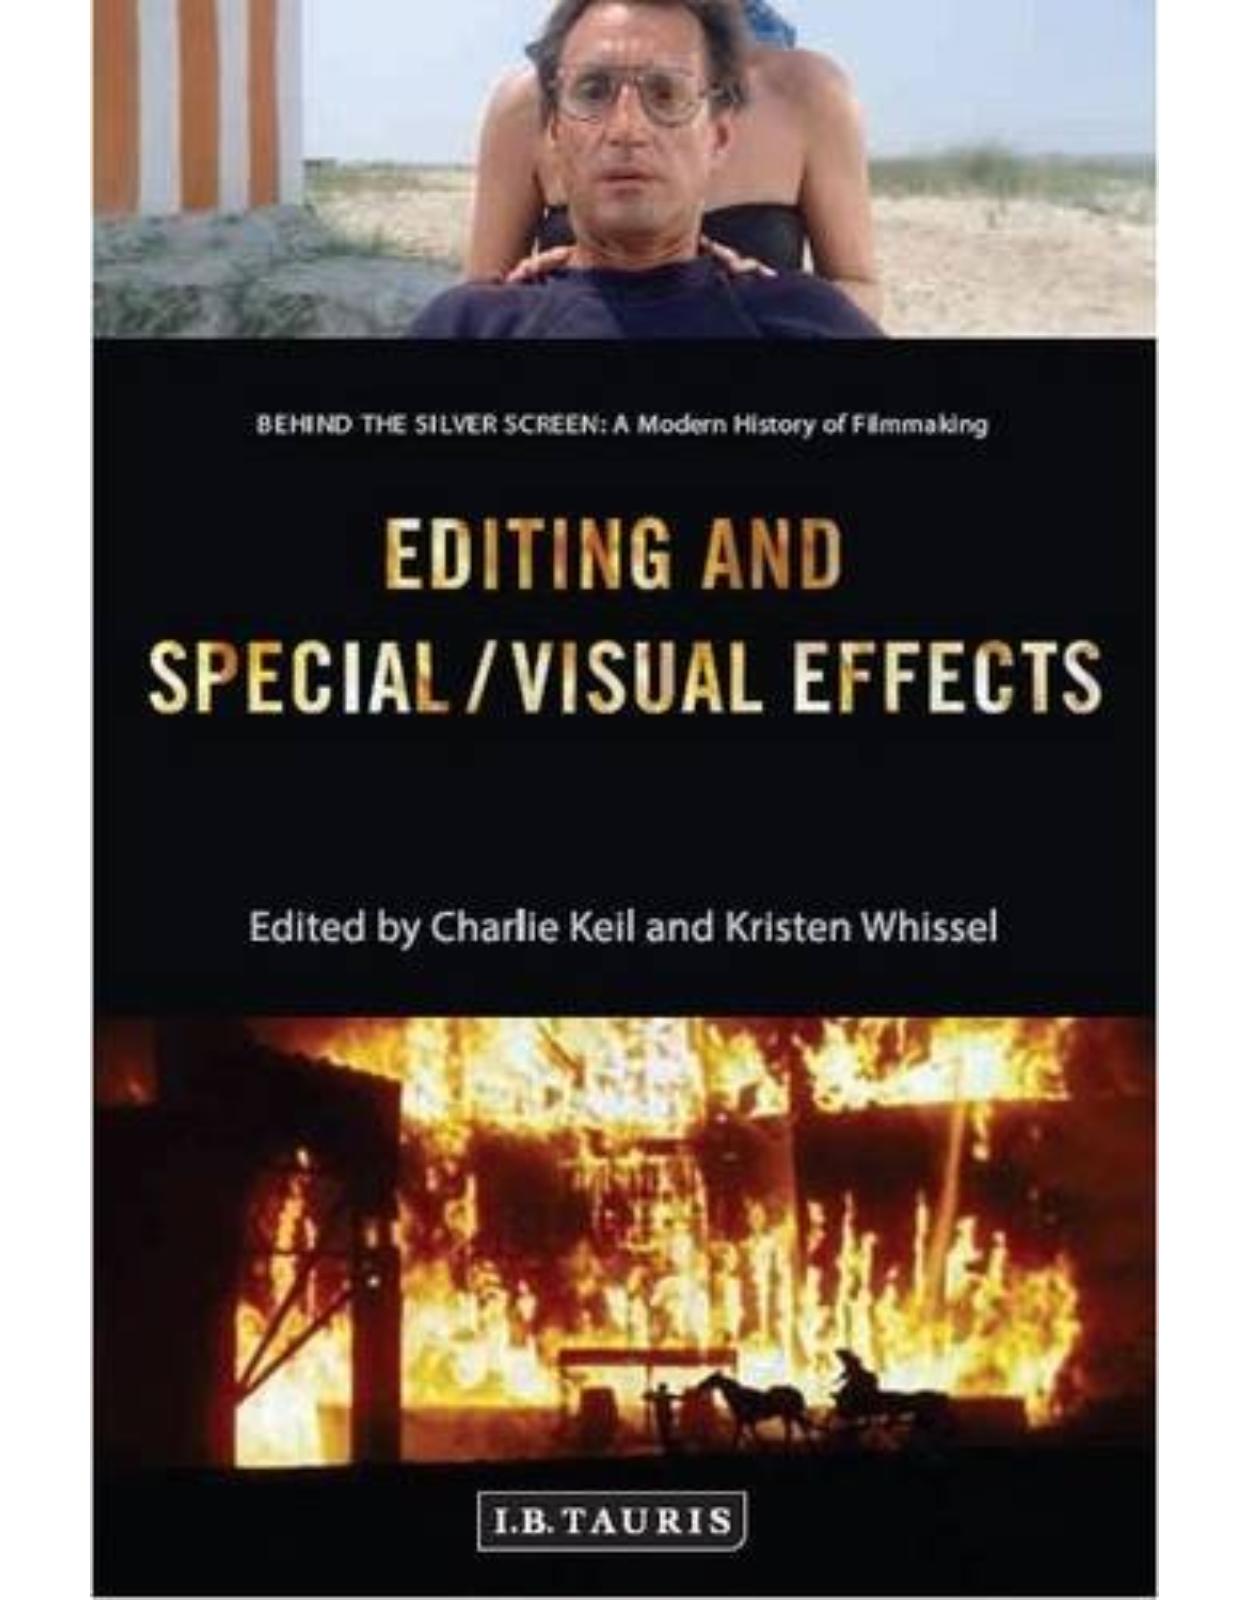 Editing and Special/Visual Effects: Behind the Silver Screen: A Modern History of Filmmaking